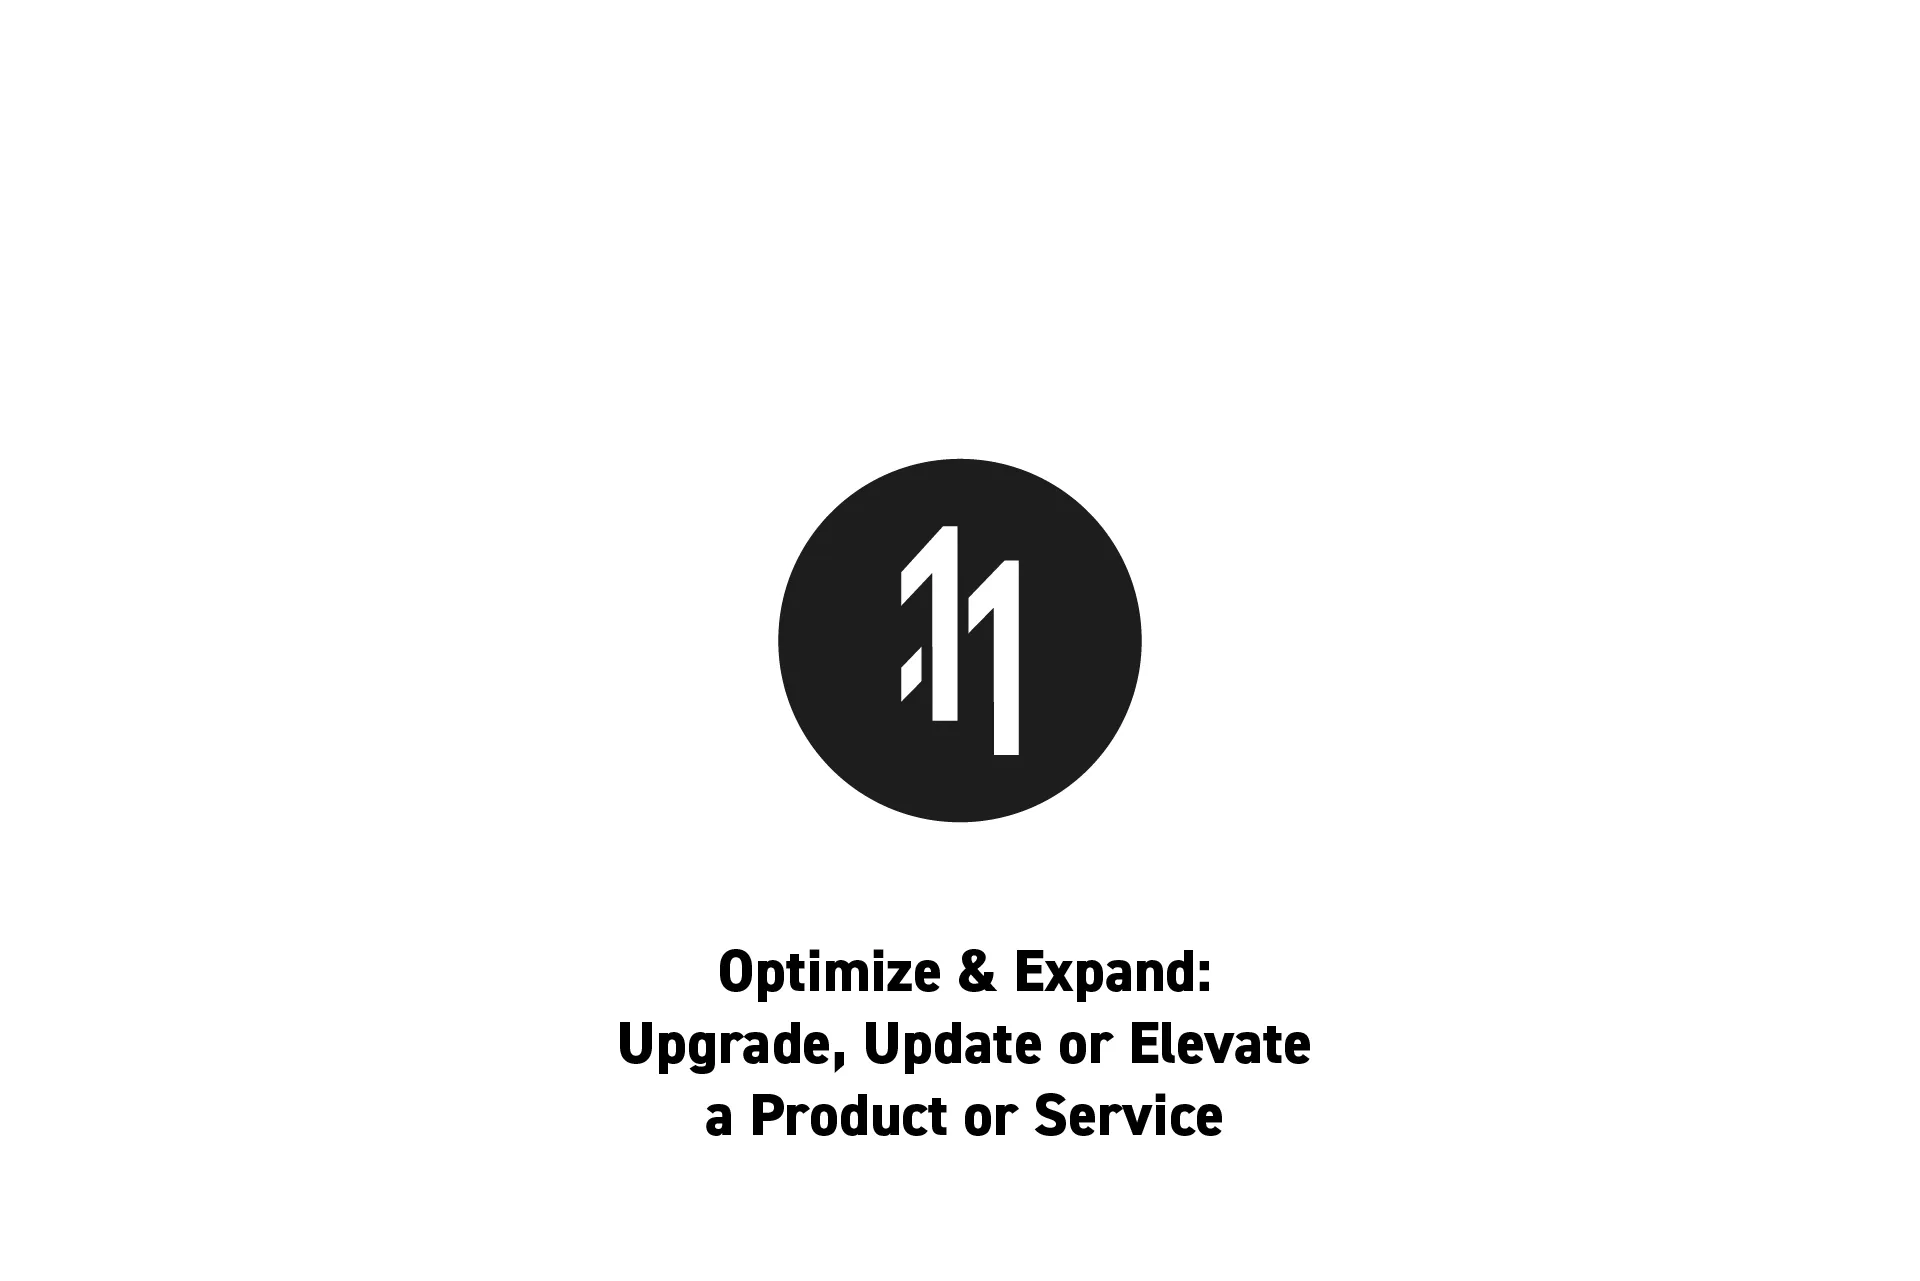 <p>The delasign logo with the text "Optimize &amp; Expand: Upgrade, Update or Elevate a Product or Service" beneath it.</p>